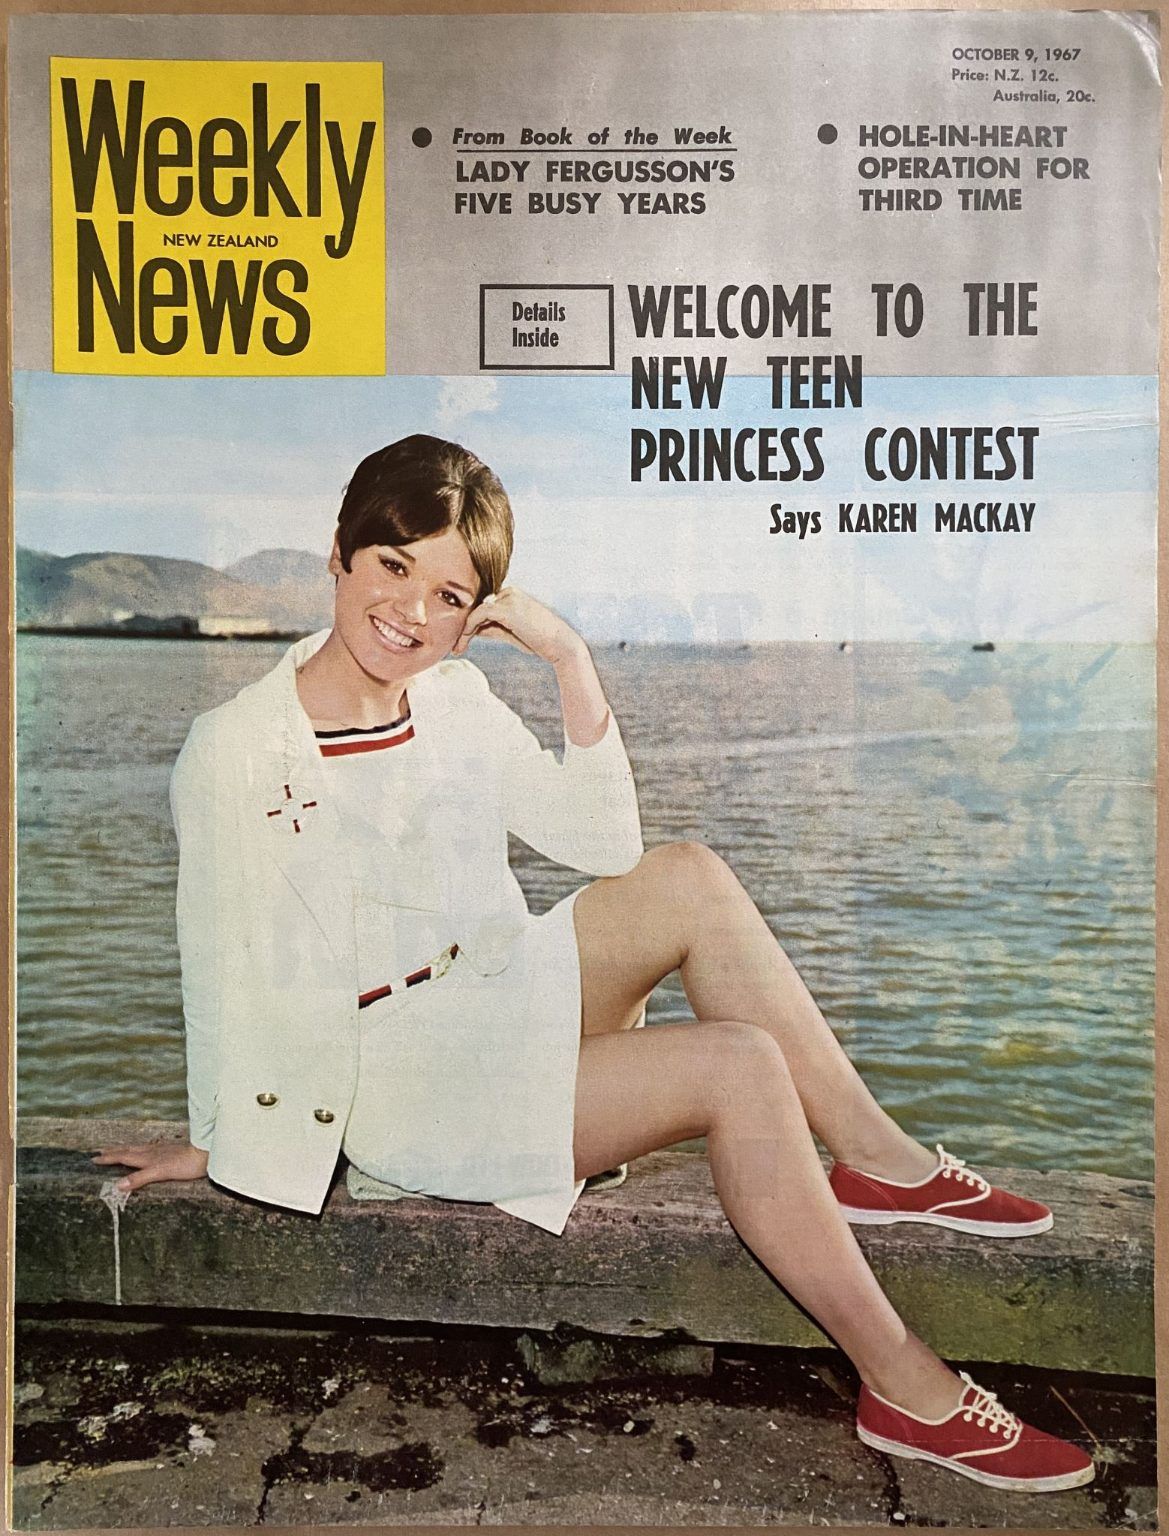 OLD NEWSPAPER: New Zealand Weekly News, No. 5419, 9 October 1967